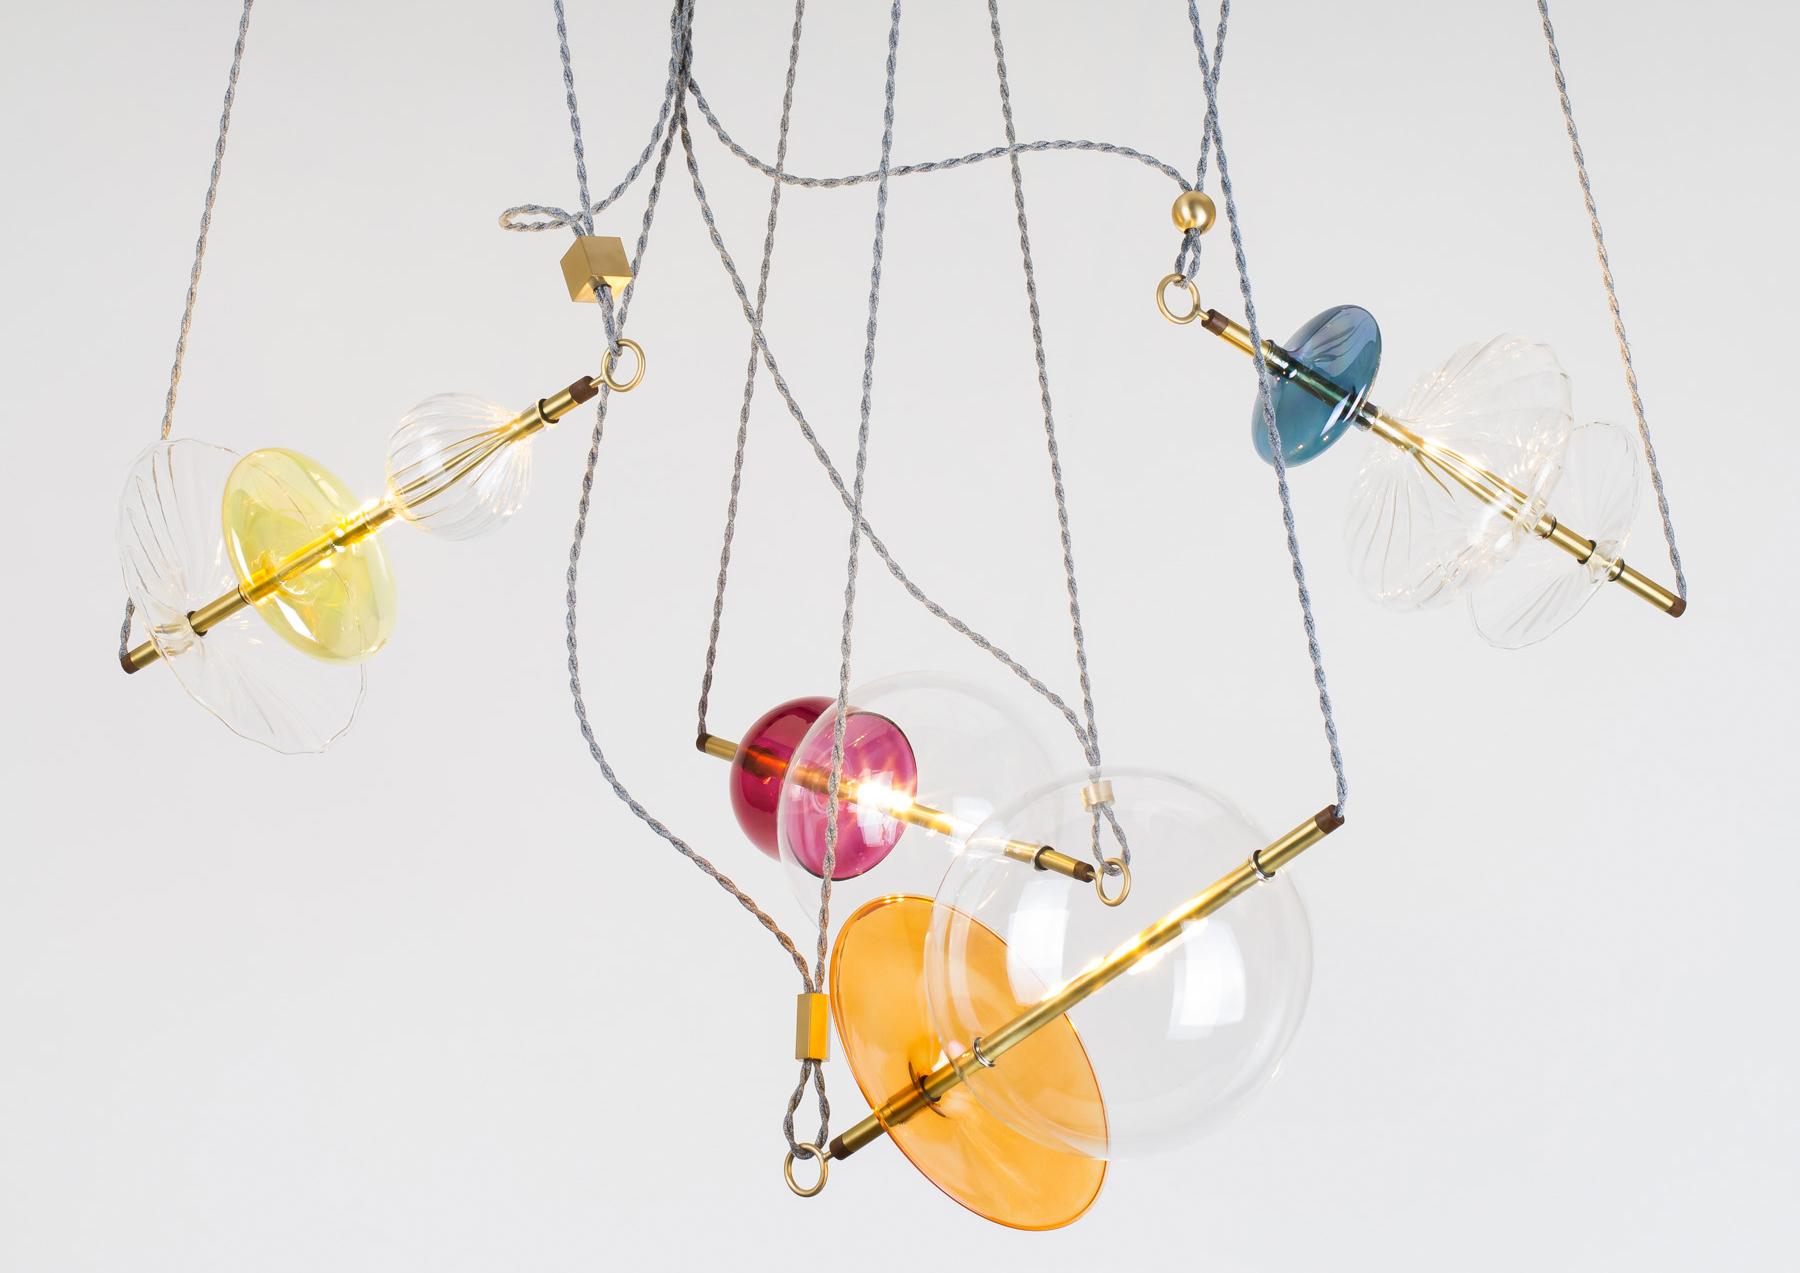 The Trapezi is a single edition, one of a kind pendant light or chandelier, inspired by the idea of a Circus Trapeze Artist. This unusual light pendant composition reinterprets in a totally different way the classic Murano chandelier